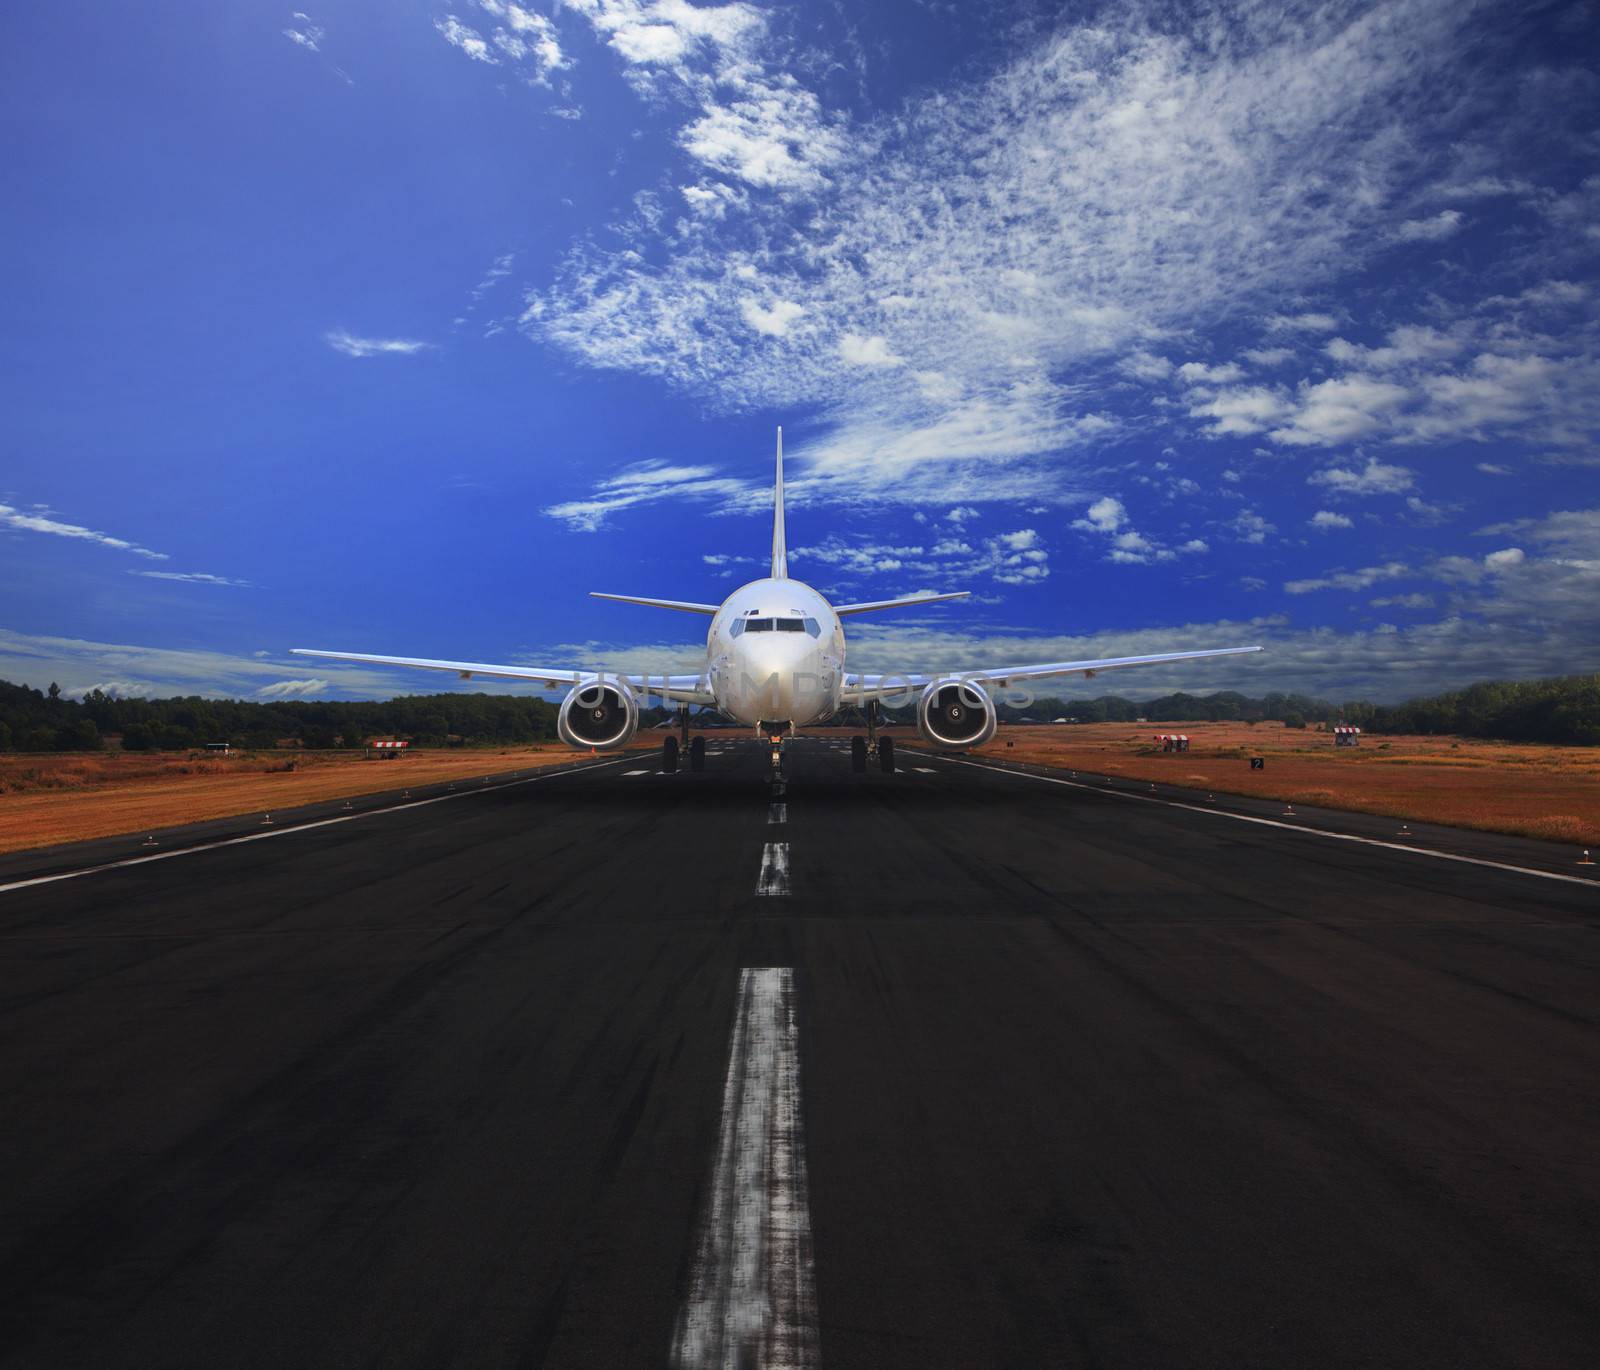 passenger air plane running on airport runway with beautiful blue sky with white cloud use for transport and traveling journey background by khunaspix